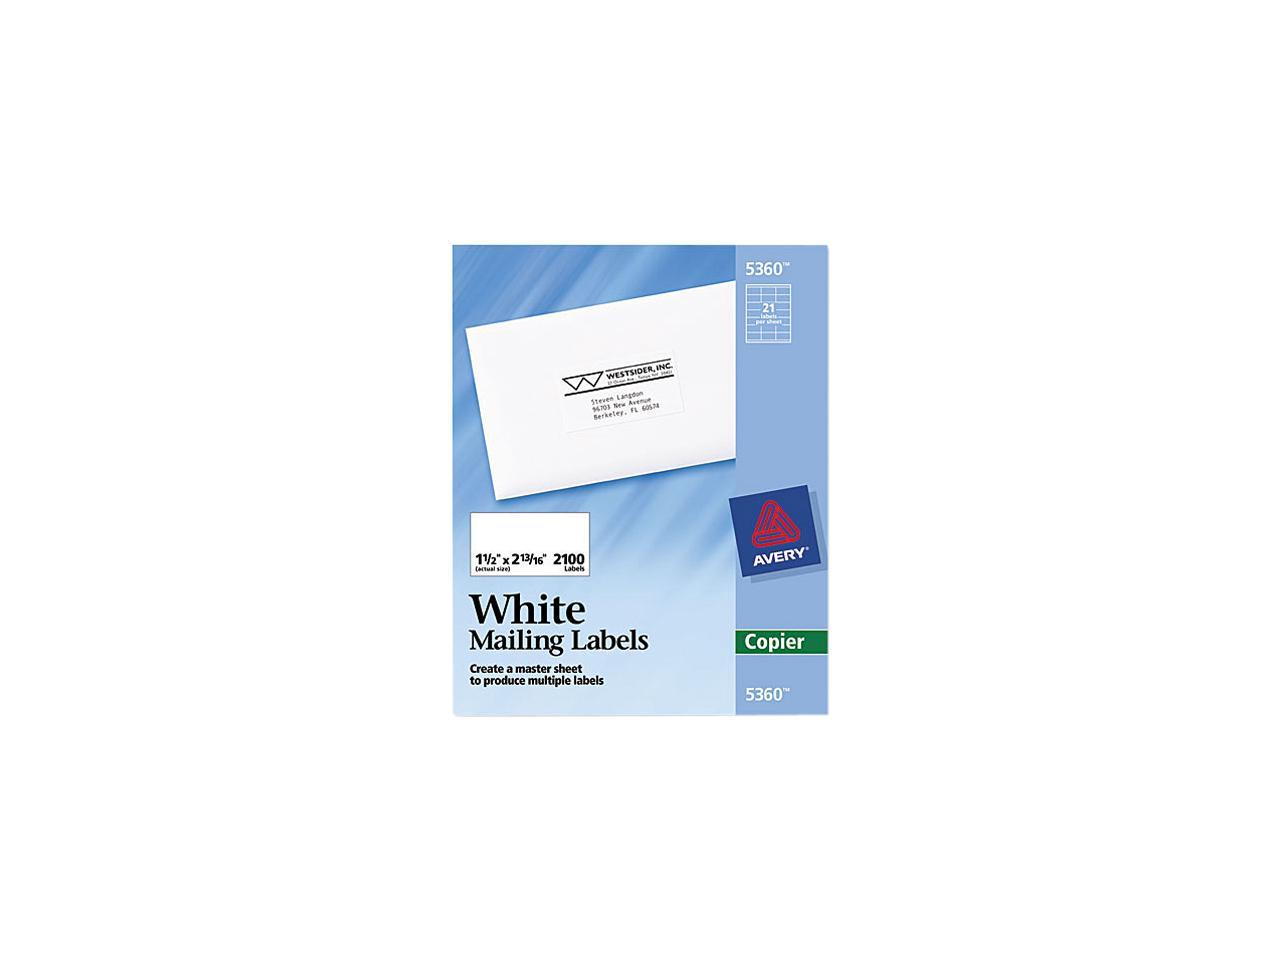 Avery 5360 SelfAdhesive Address Labels for Copiers, 11/2 x 213/16